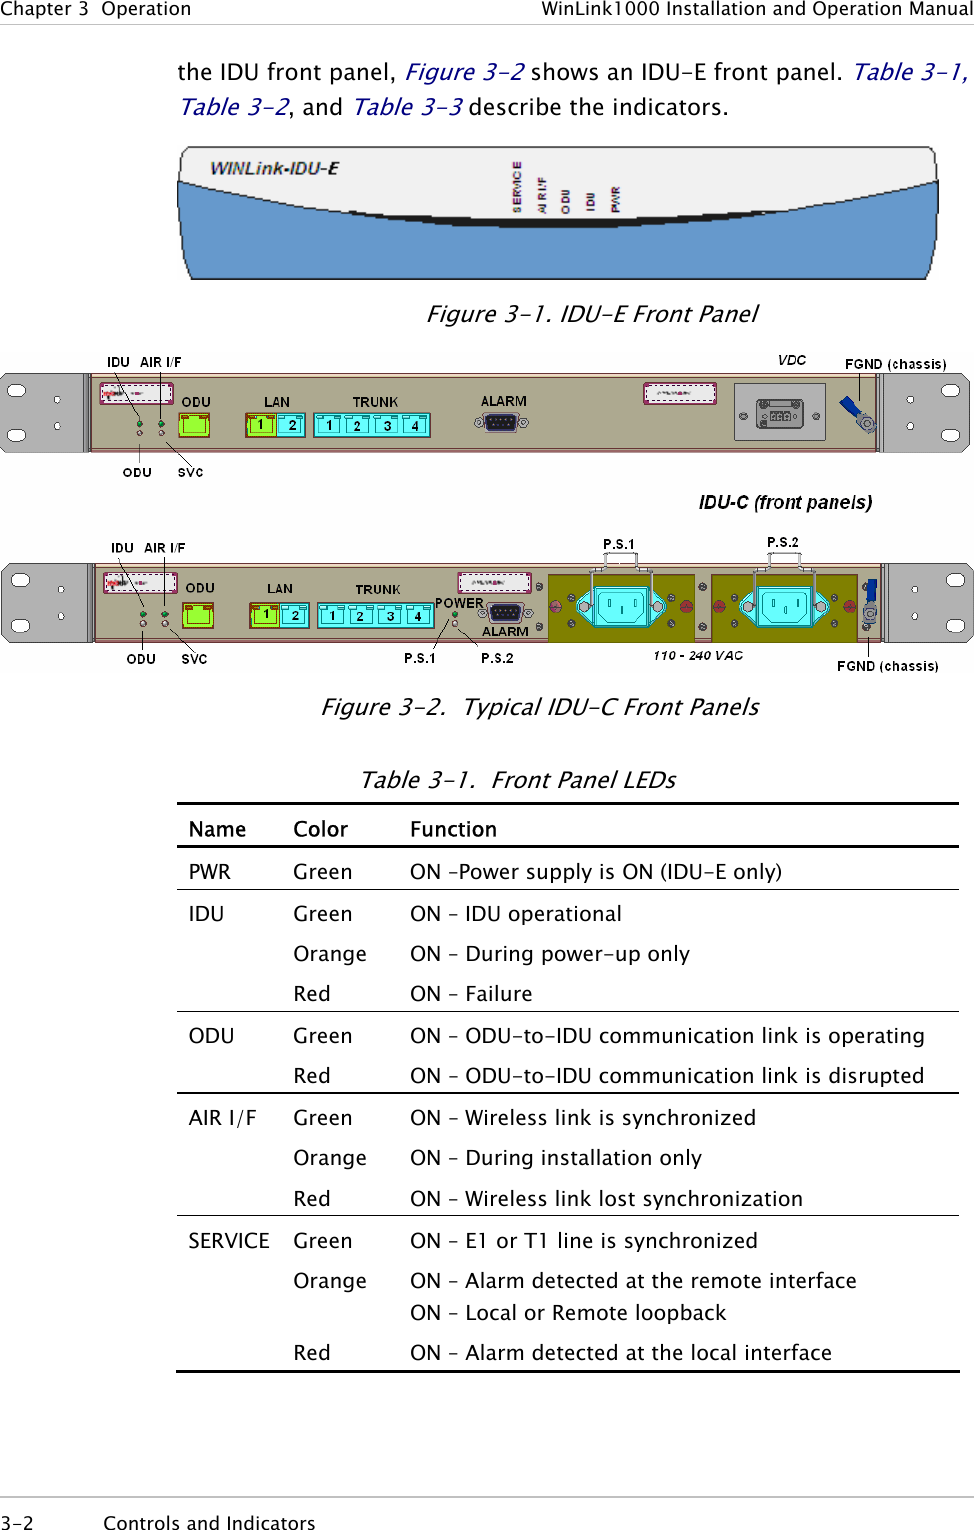 Chapter  3  Operation  WinLink1000 Installation and Operation Manual the IDU front panel, Figure  3-2 shows an IDU-E front panel. Table  3-1, Table  3-2, and Table  3-3 describe the indicators.  Figure  3-1. IDU-E Front Panel  Figure  3-2.  Typical IDU-C Front Panels Table  3-1.  Front Panel LEDs Name Color  Function PWR  Green  ON –Power supply is ON (IDU-E only) IDU Green Orange Red ON – IDU operational ON – During power-up only ON – Failure ODU Green Red ON – ODU-to-IDU communication link is operating ON – ODU-to-IDU communication link is disrupted  AIR I/F  Green Orange Red ON – Wireless link is synchronized ON – During installation only ON – Wireless link lost synchronization SERVICE Green Orange  Red ON – E1 or T1 line is synchronized ON – Alarm detected at the remote interface ON – Local or Remote loopback ON – Alarm detected at the local interface 3-2 Controls and Indicators  